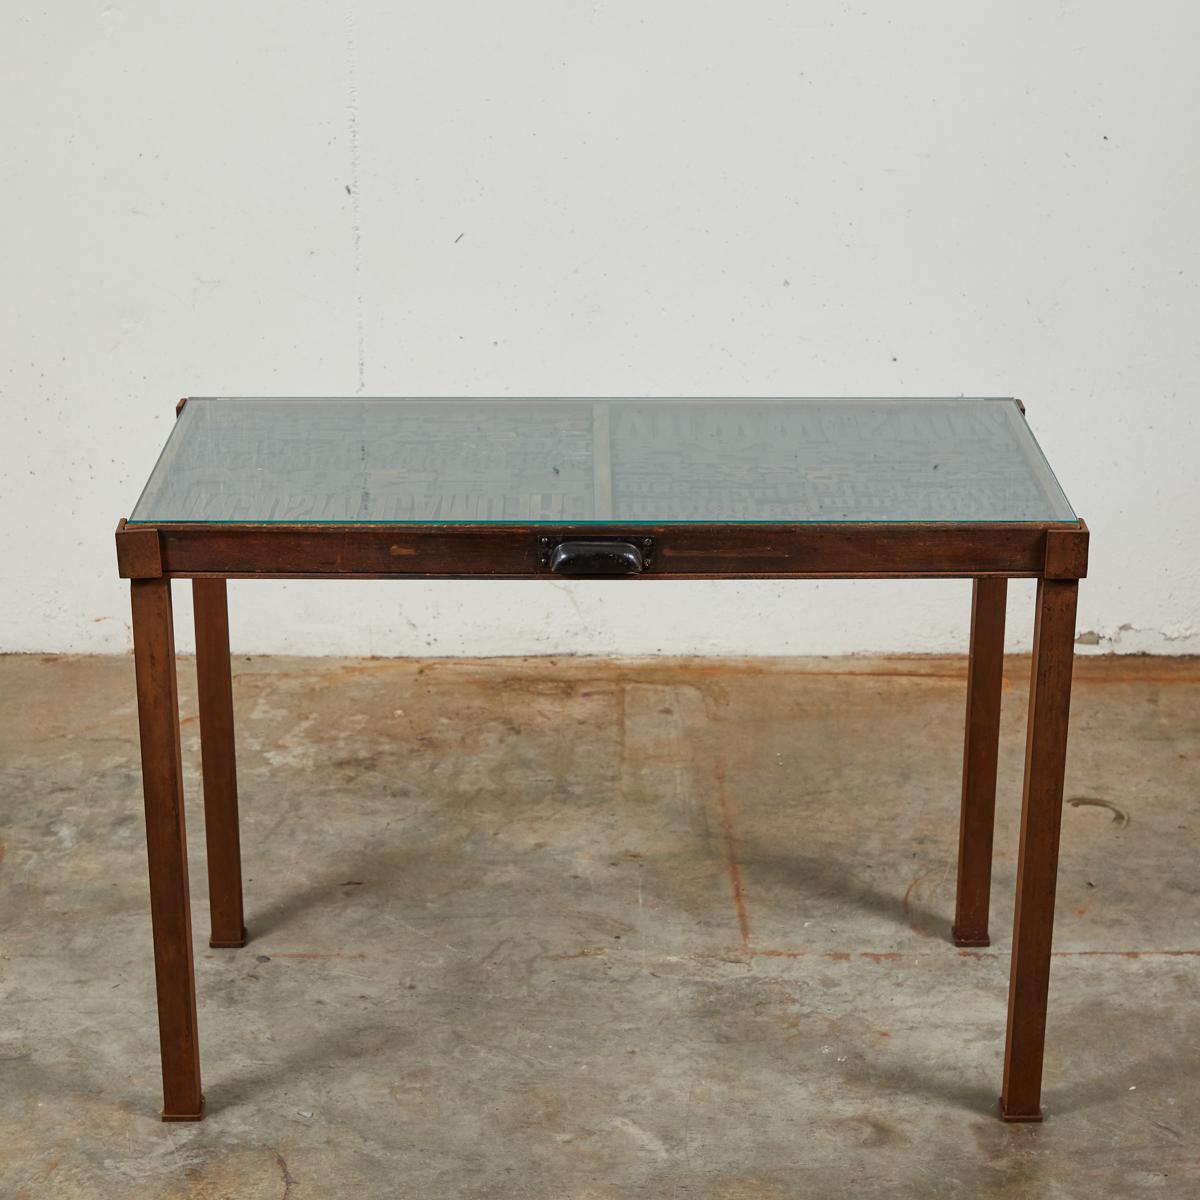 Industrial glass top table with graphic lettered top. This unique table began its life as a typeface tray in late 19th-century France. Having since been mounted on rectangular iron legs and given a glass top, the table's design reflects its